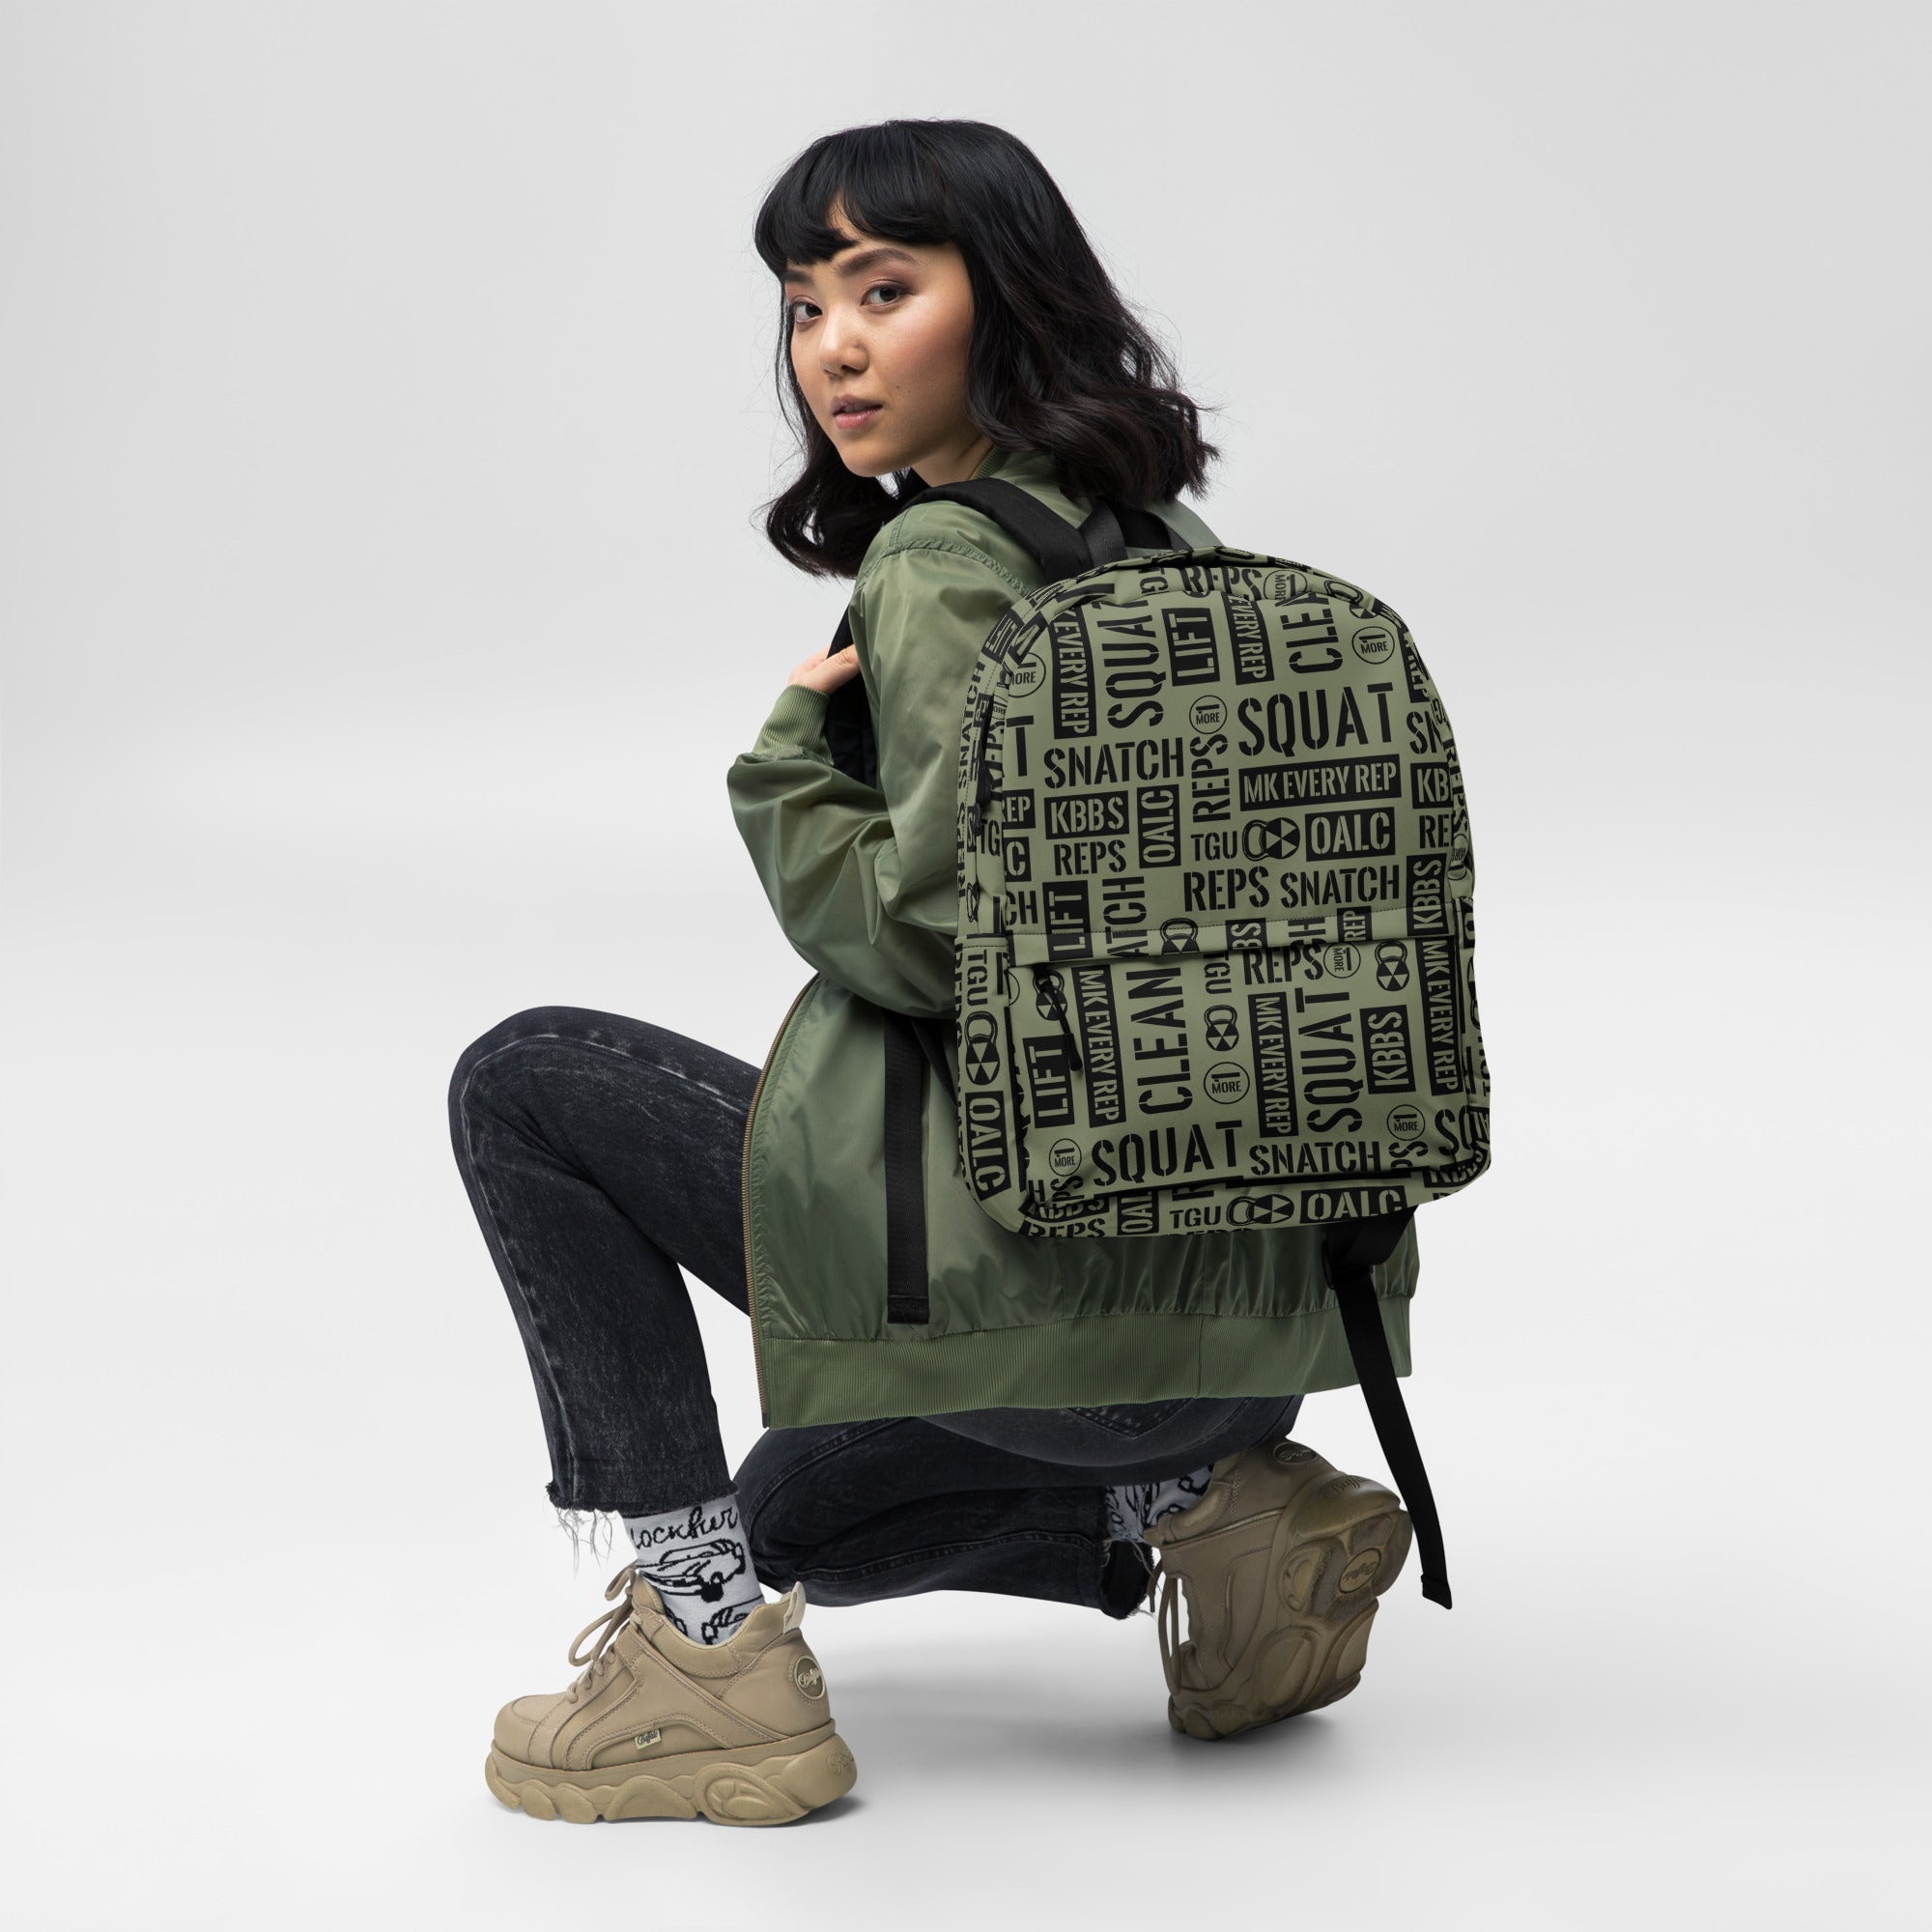 Military Green Acronyms Backpack